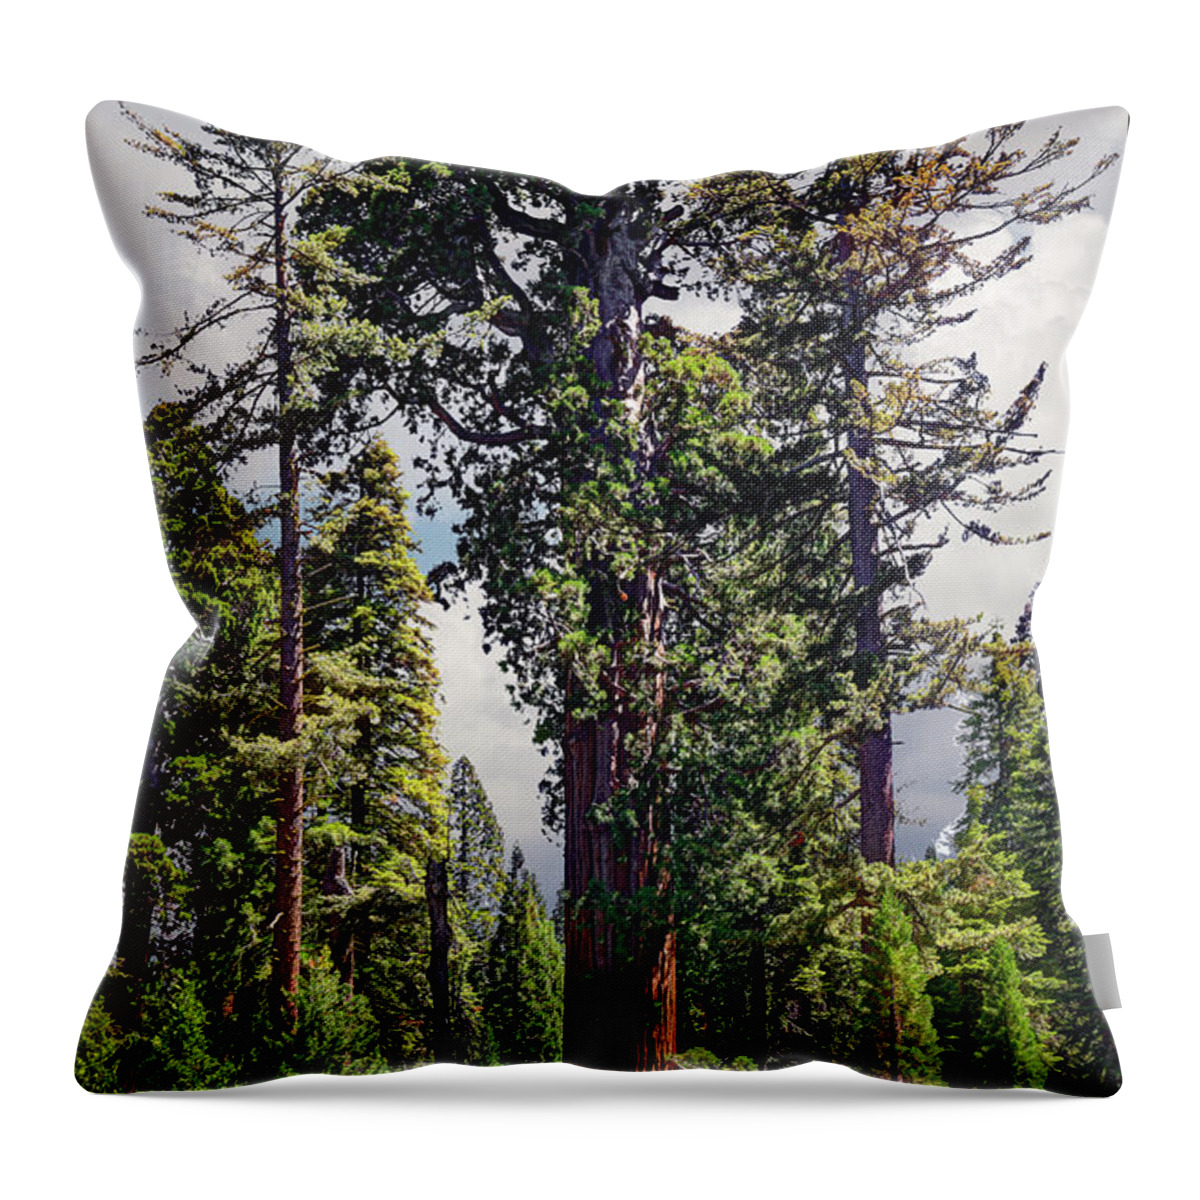 Sequoia Tree Throw Pillow featuring the photograph General Grant Sequoia Tree, Kings Canyon by Ed Freeman